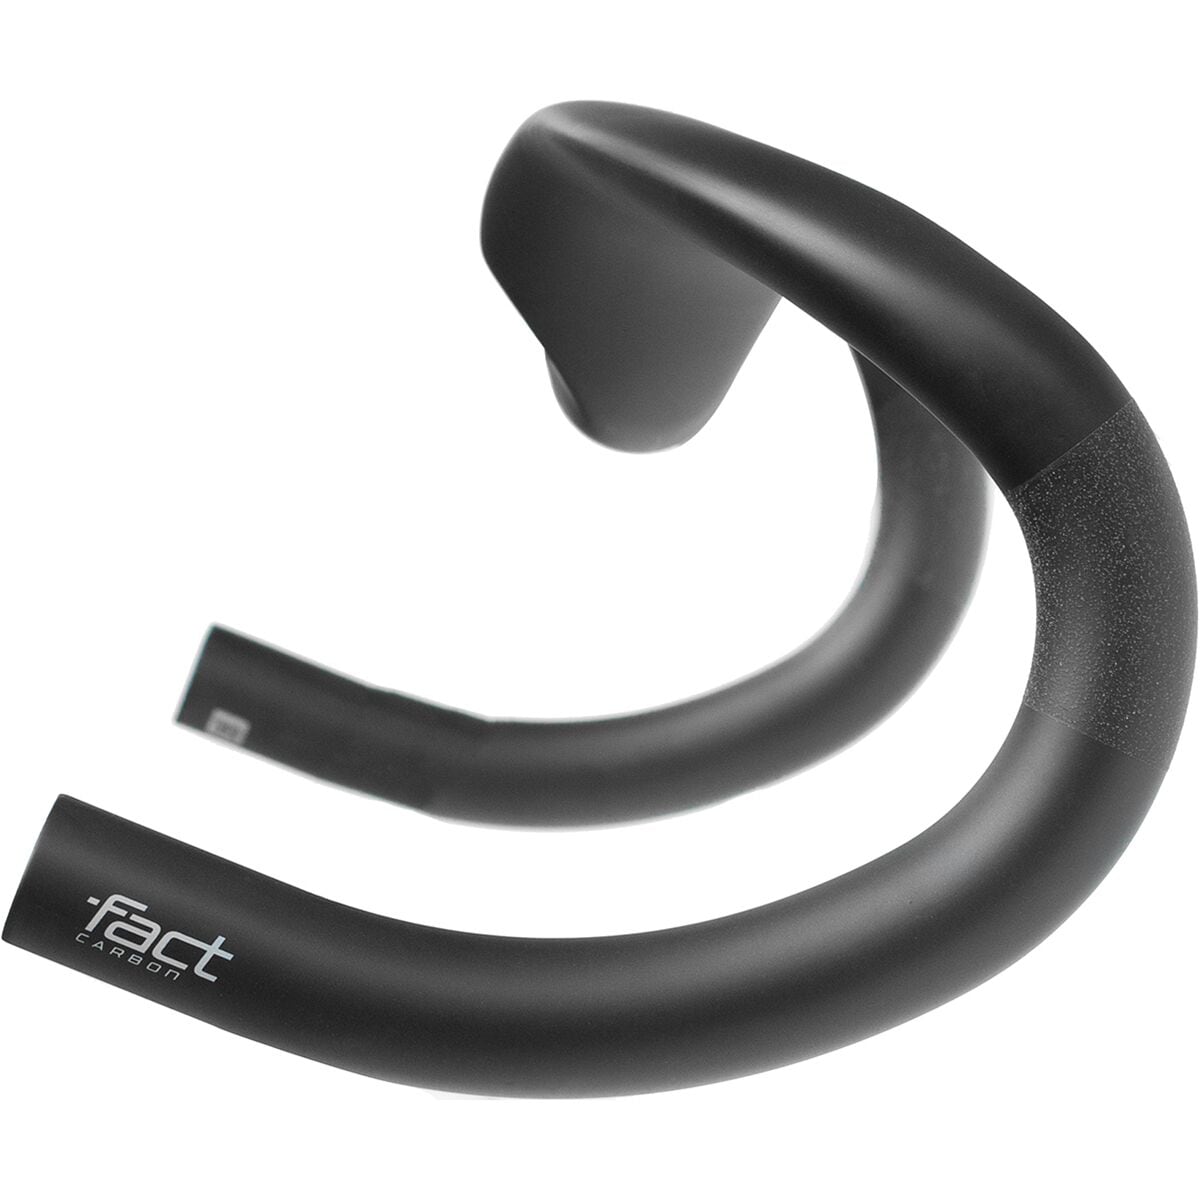 Specialized S-Works Aerofly Carbon Handlebar - Components